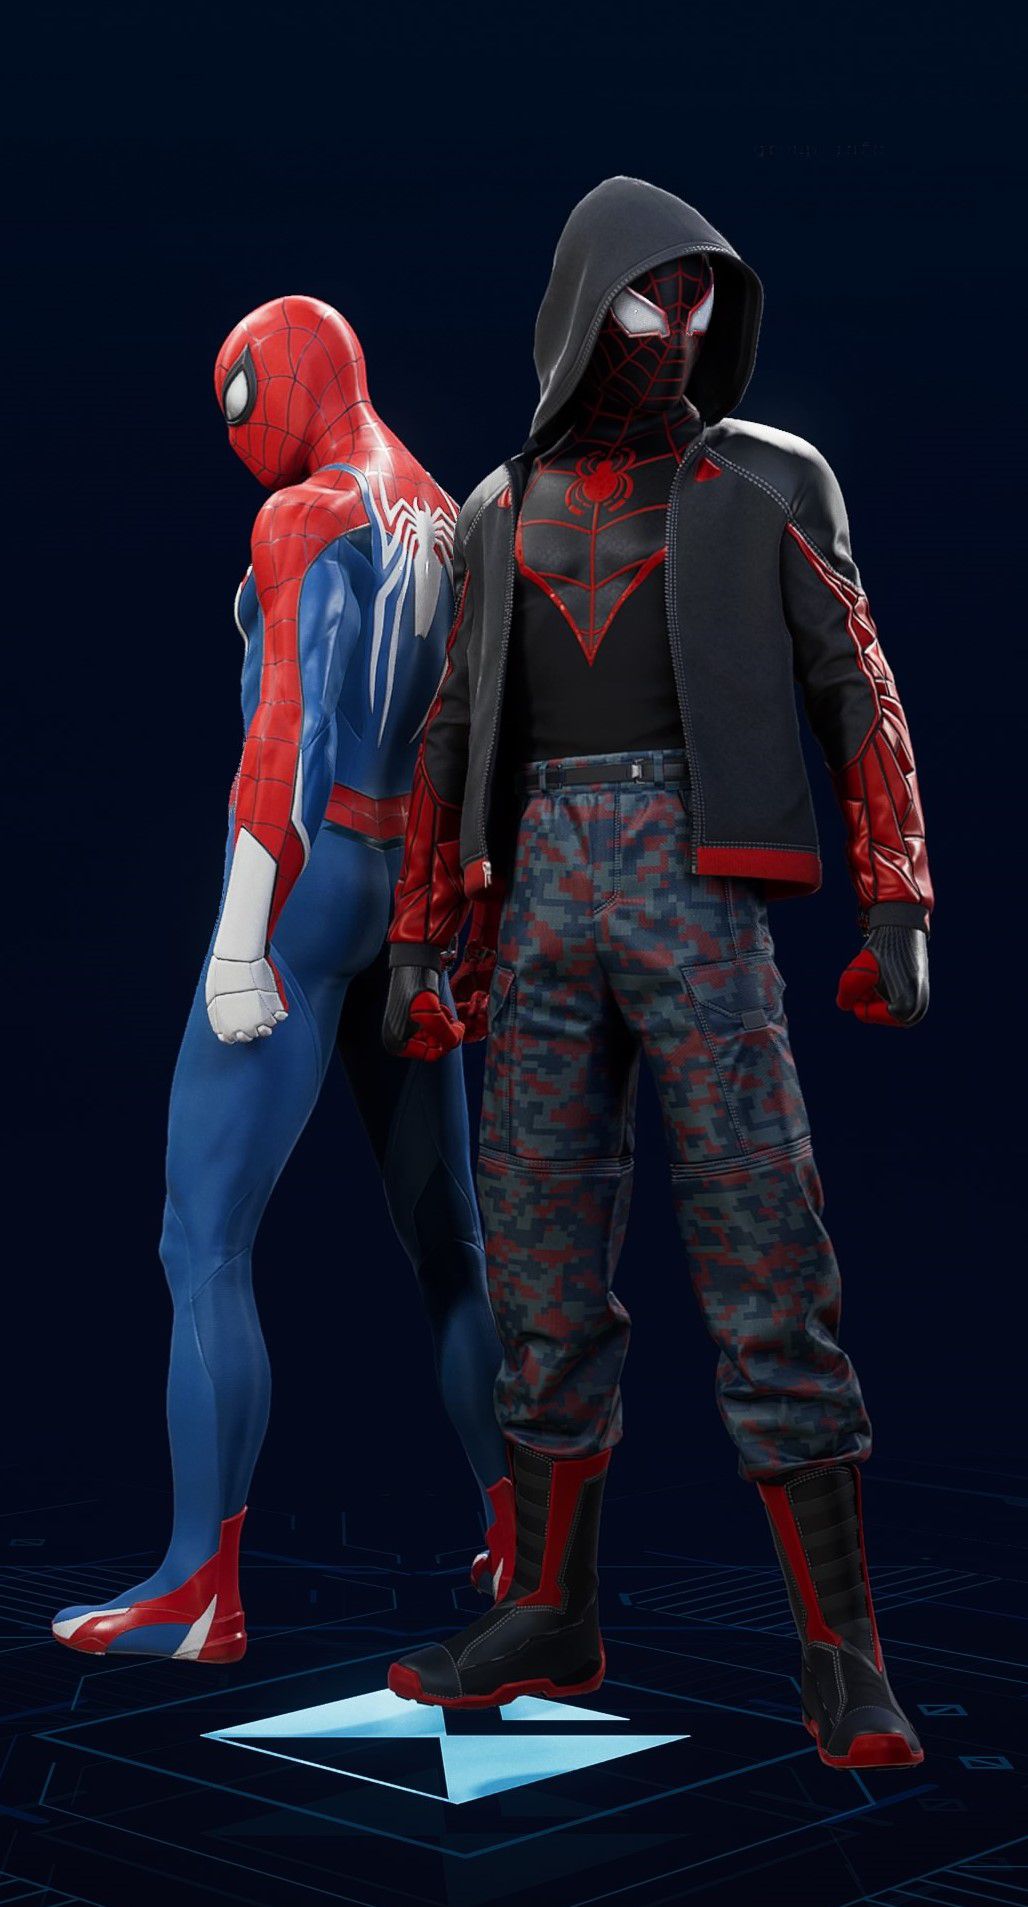 Miles Morales stands in his The End Suit in the suit selection screen of Spider-Man 2.